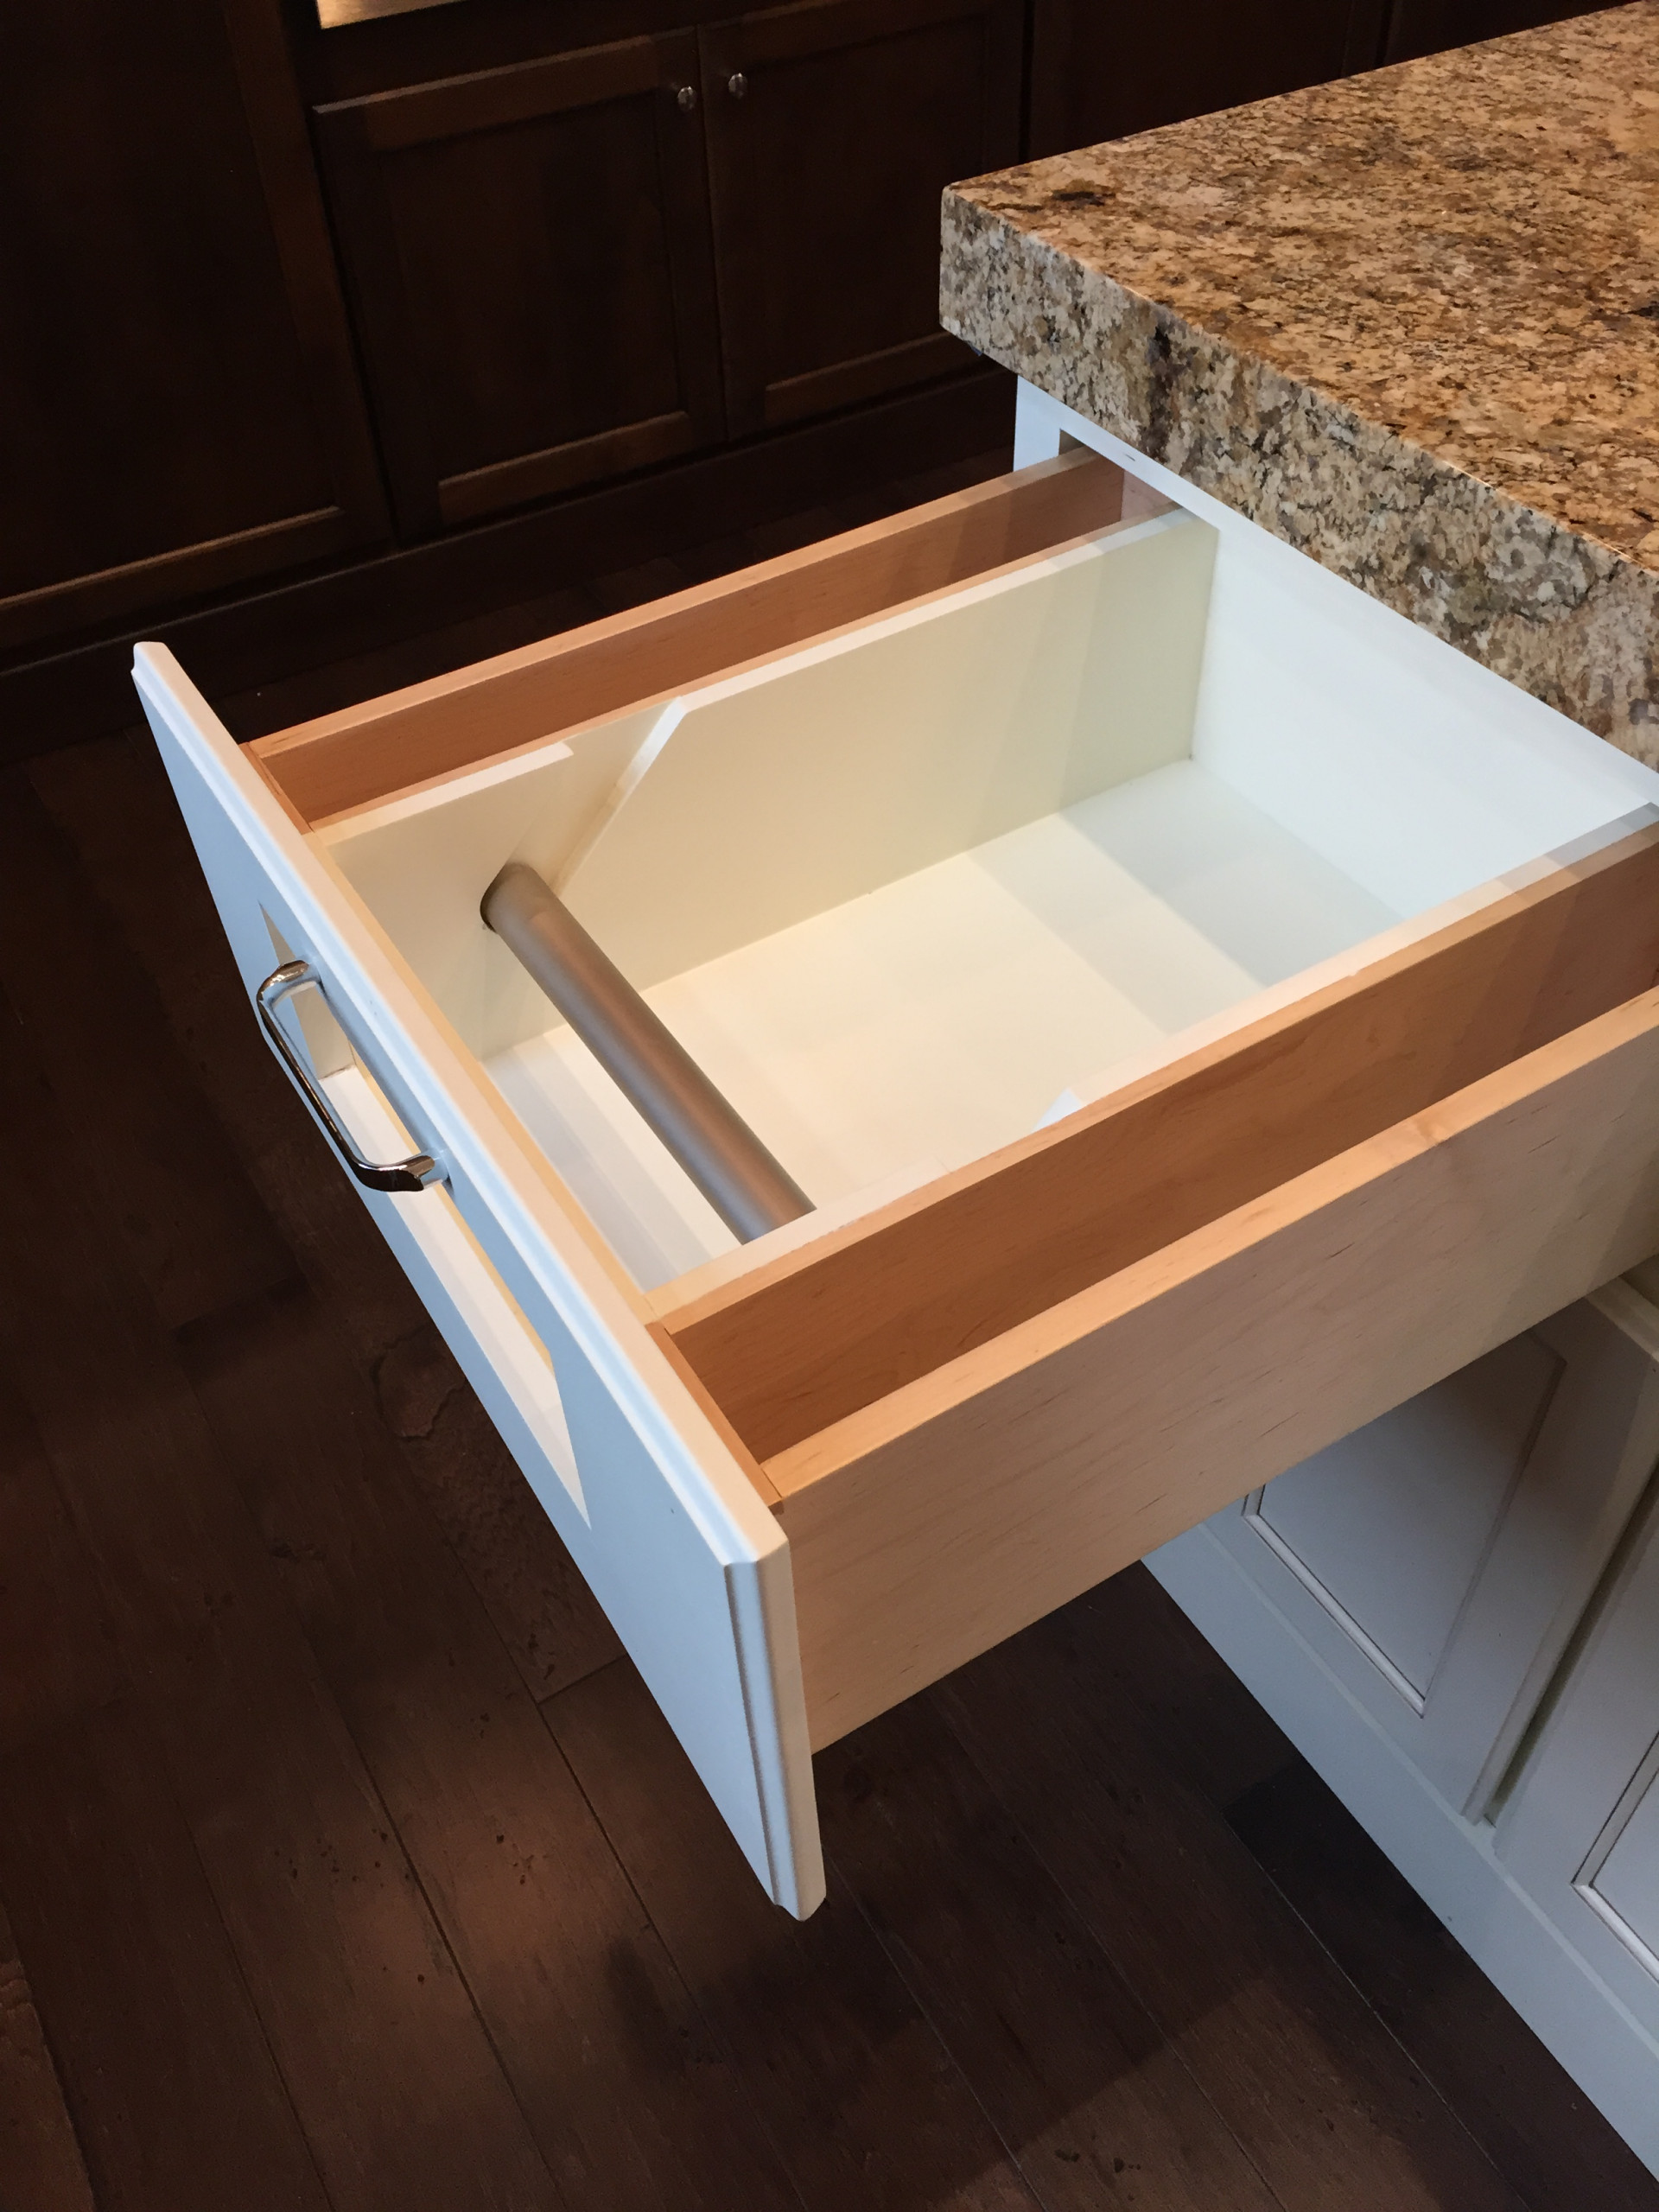 https://st.hzcdn.com/simgs/pictures/kitchens/paper-towel-drawer-open-unico-design-cabinetry-llc-img~d681523604f391eb_14-7147-1-05c8473.jpg